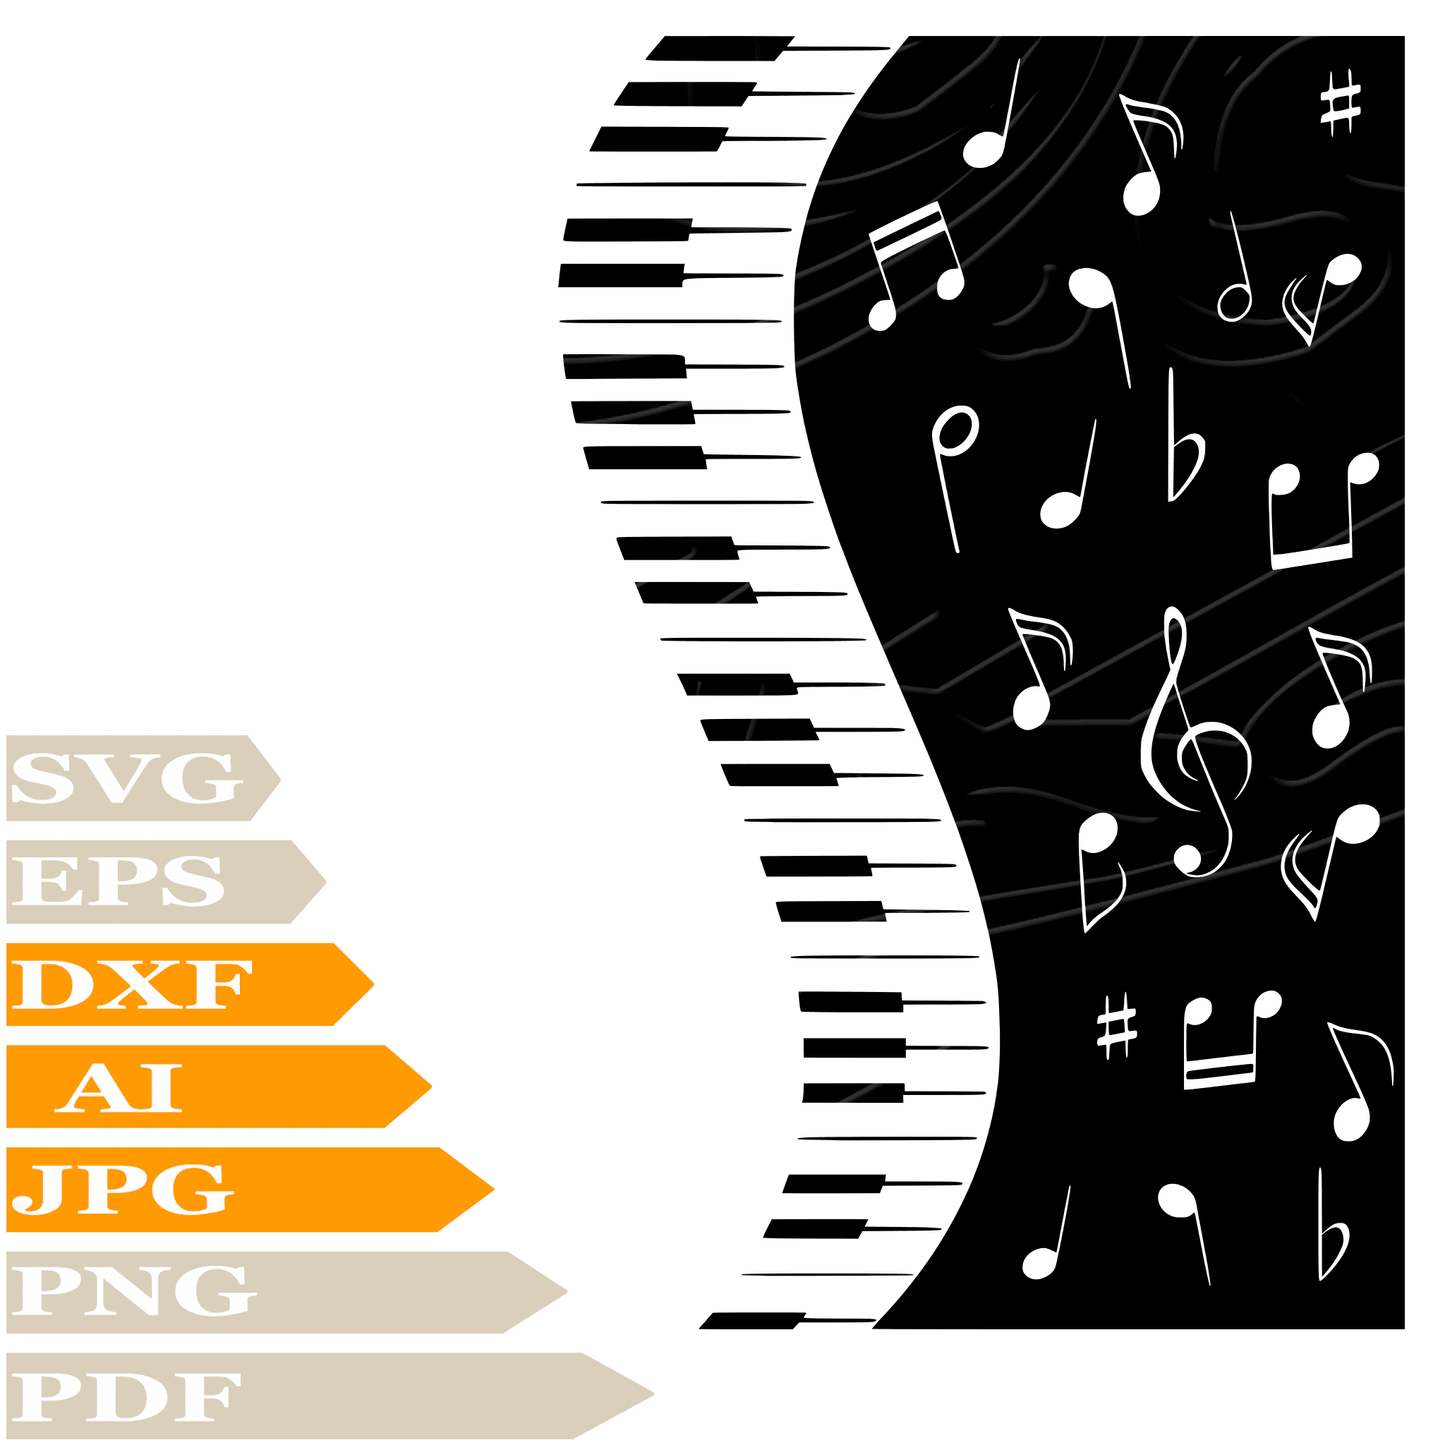 Melody SVG File, Кeyboard With Notes SVG Design, Music Notes Vector Graphics, PNG, Image Cut, Cricut, Clipart, Instant Download, Clip Art, Silhouette